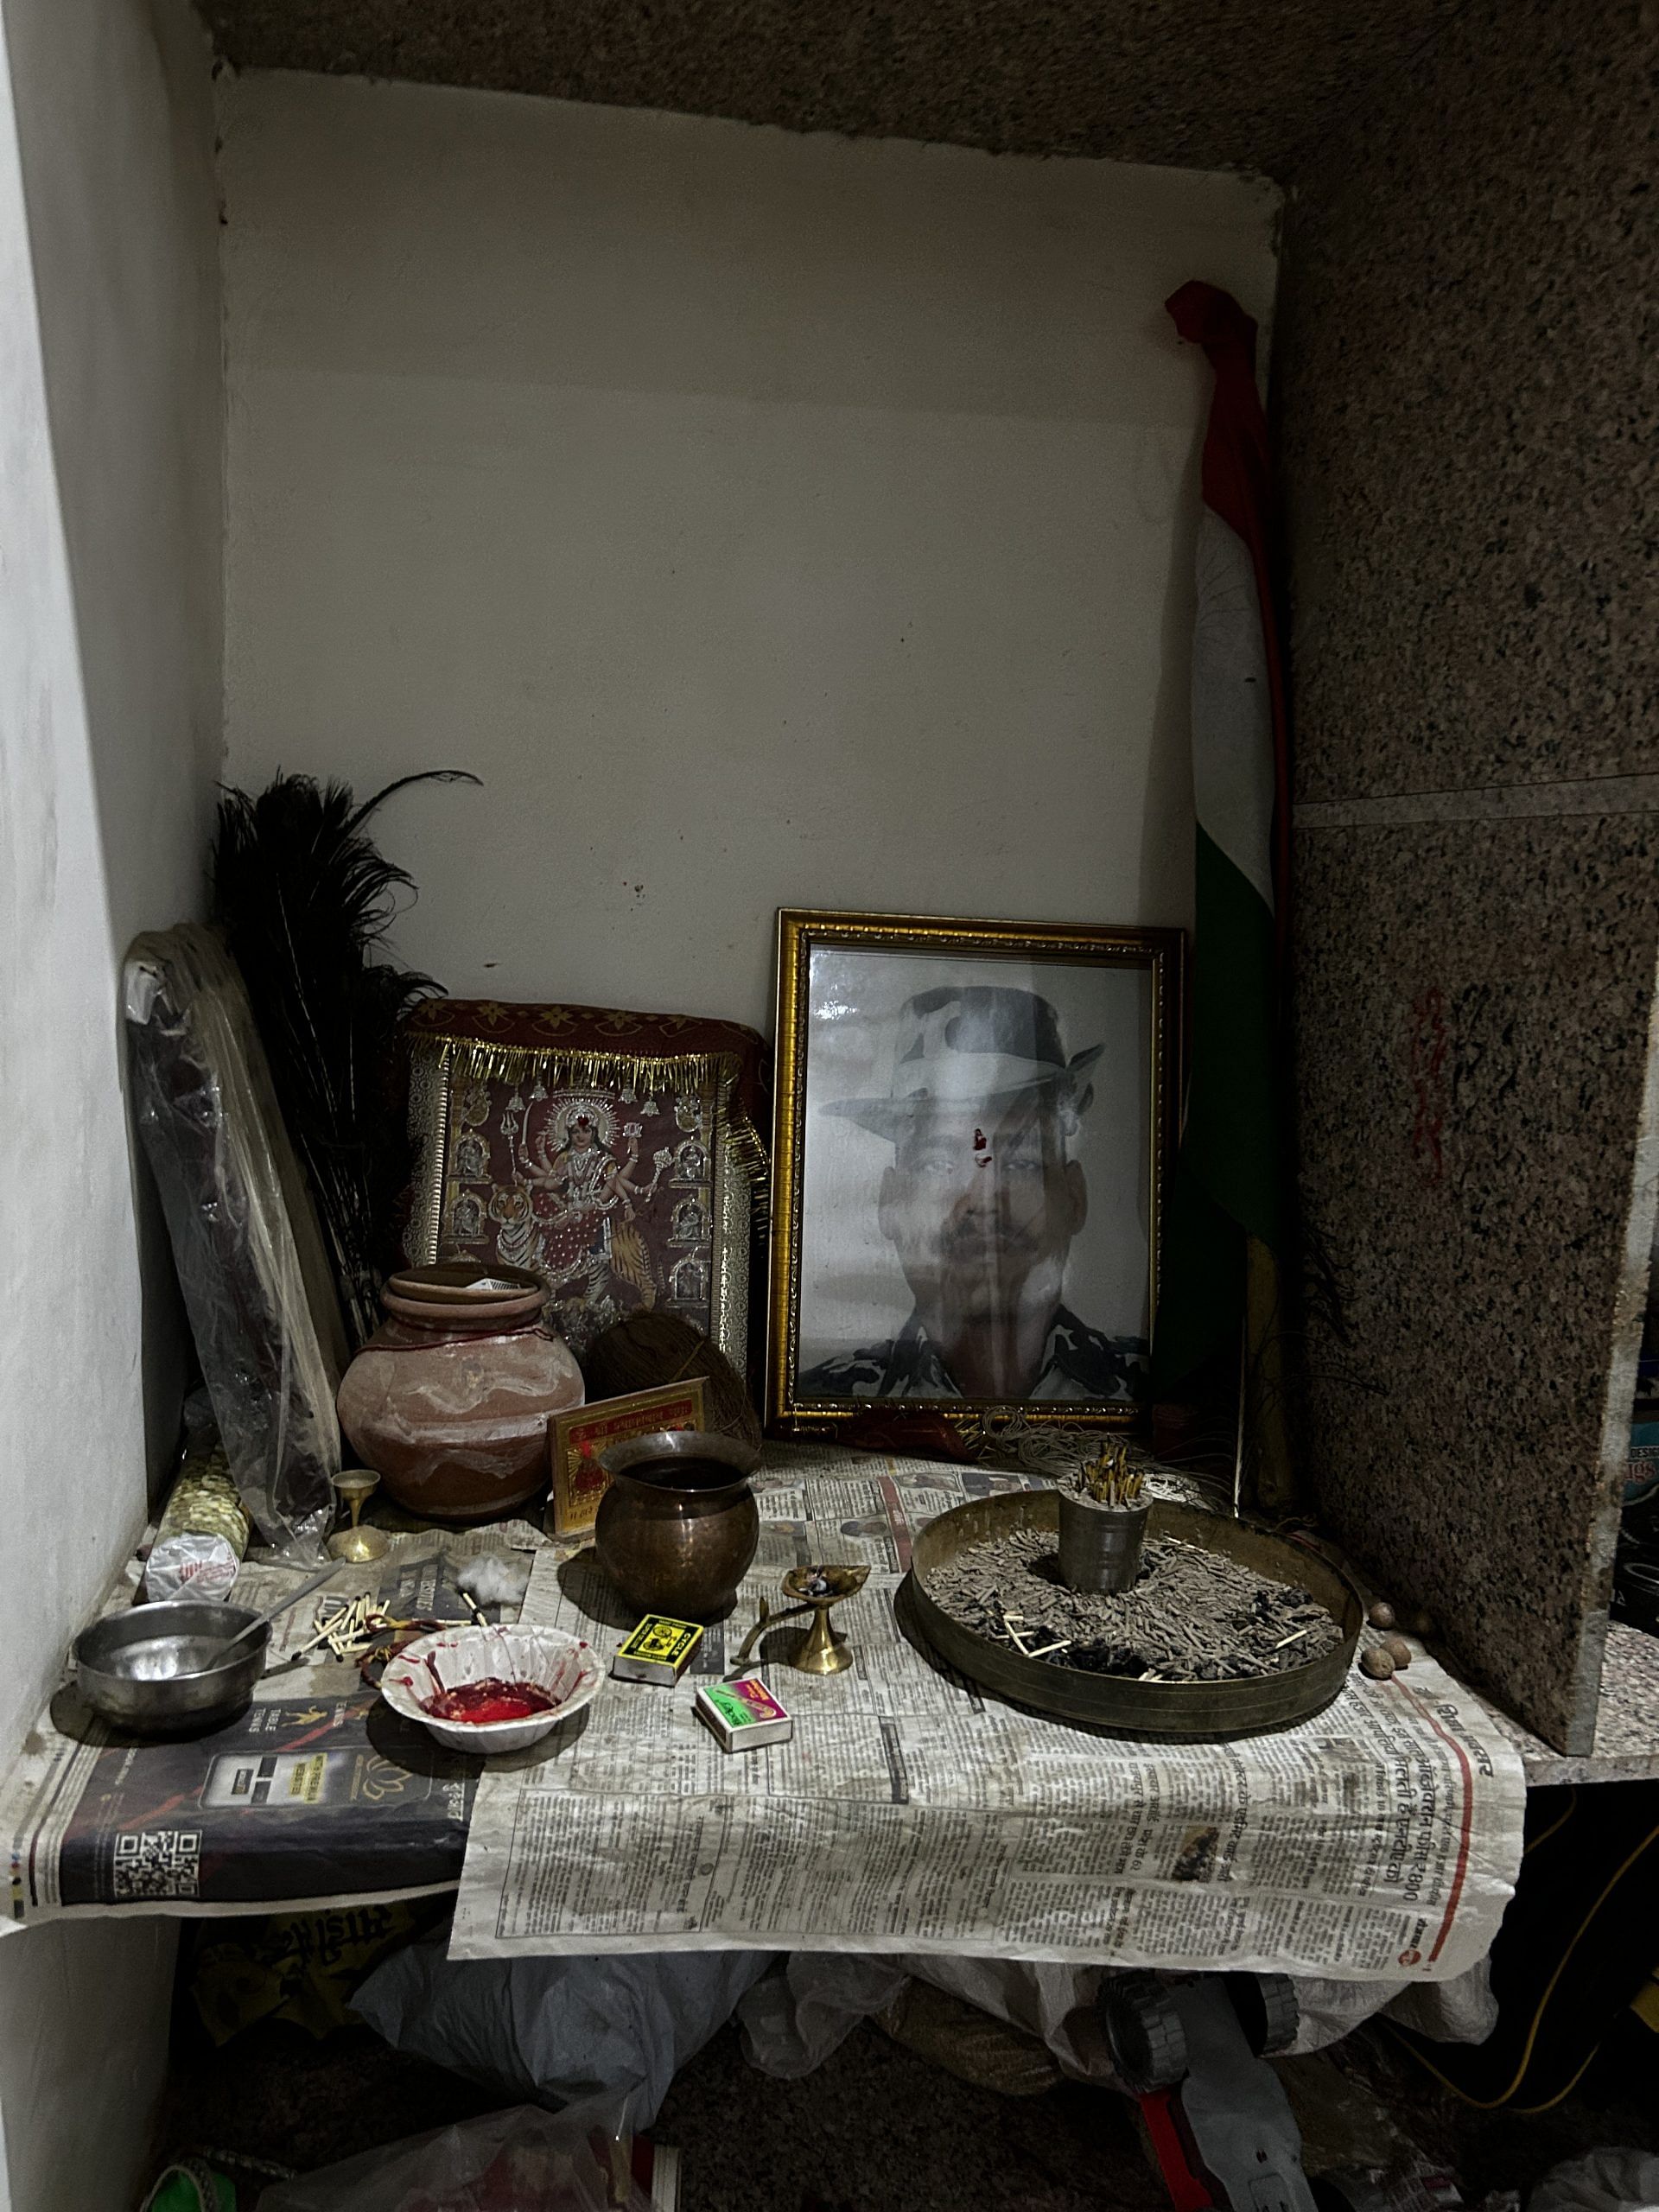 Rohitash Lamba’s photo placed along with the Gods in Manju’s house. She lives in a rented house, on the outskirts of Jaipur | Jyoti Yadav, ThePrint